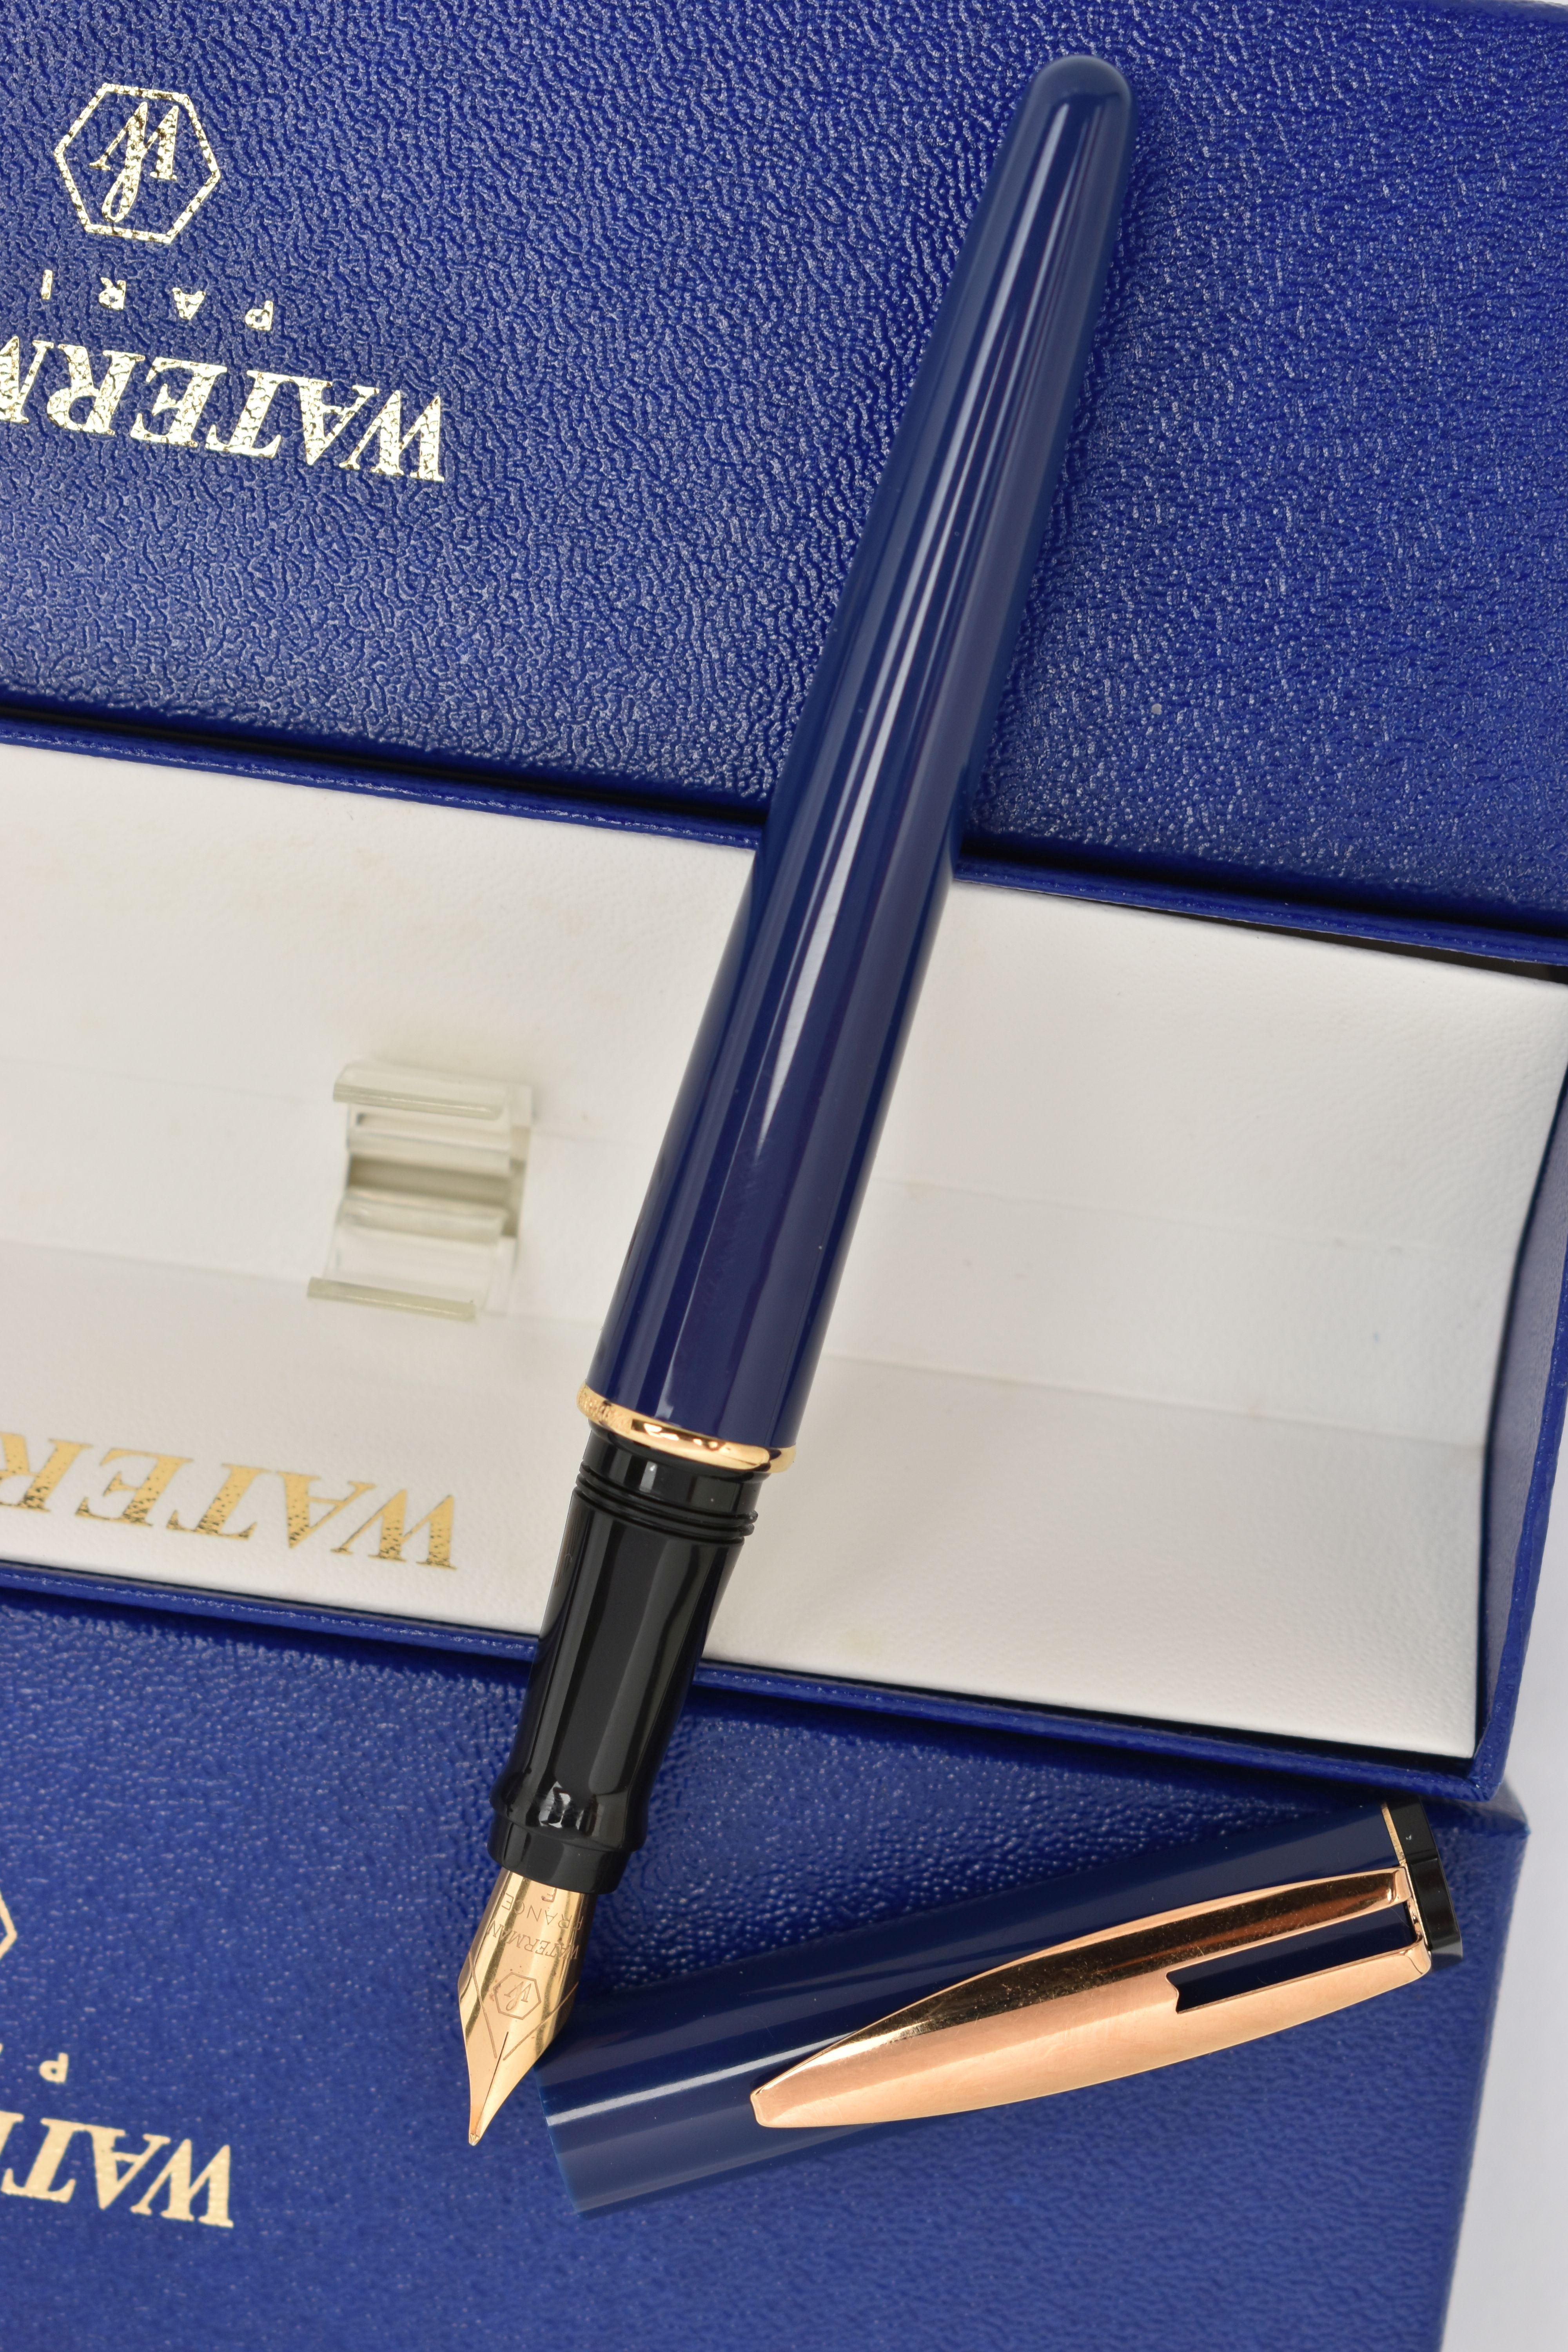 TWO BOXED 'WATERMAN' FOUNTAIN PENS, blue lacquer pens, signed to each collar 'Waterman', both fitted - Image 2 of 5